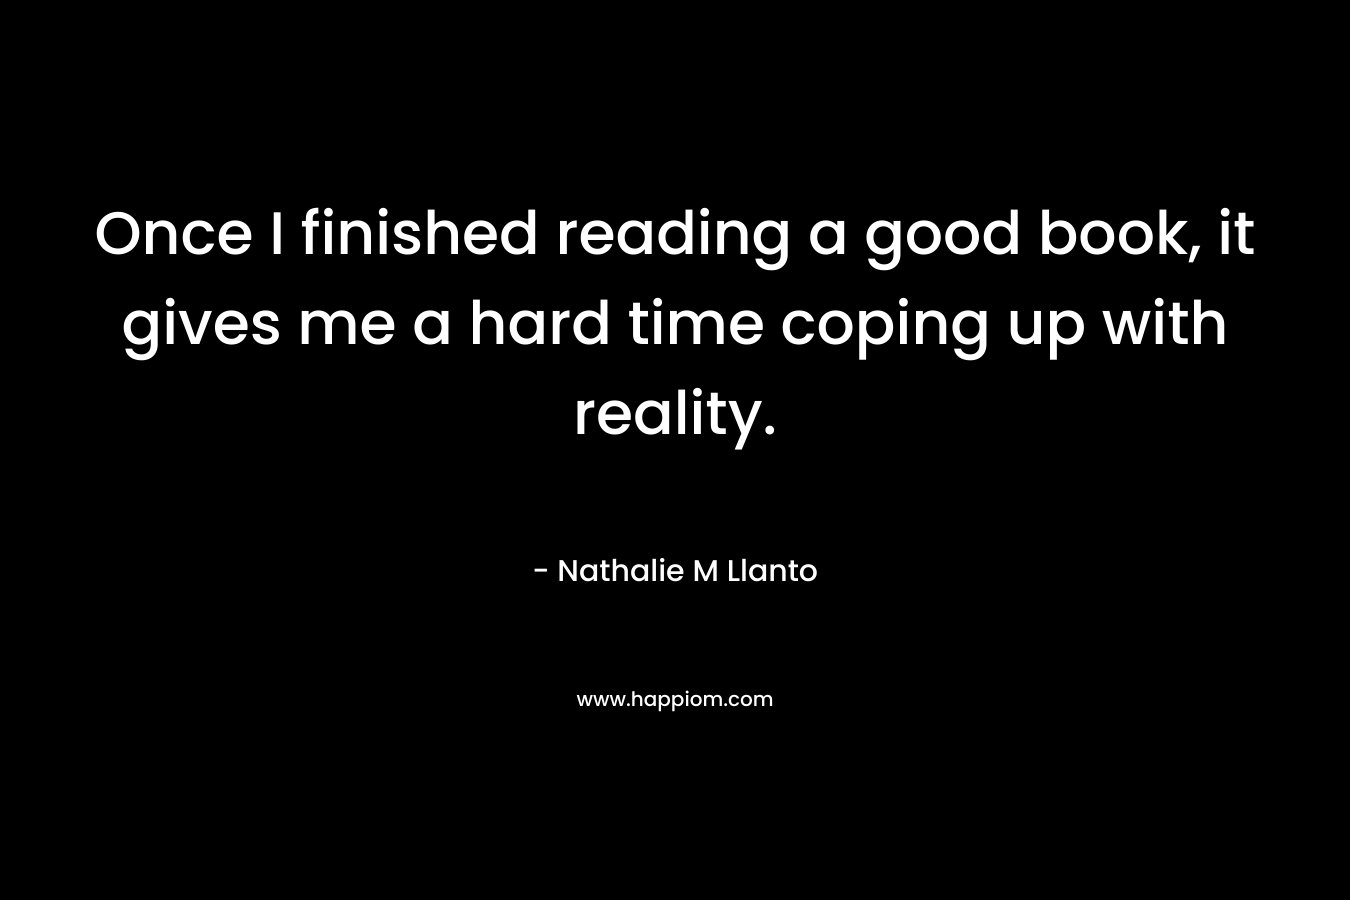 Once I finished reading a good book, it gives me a hard time coping up with reality. – Nathalie M Llanto